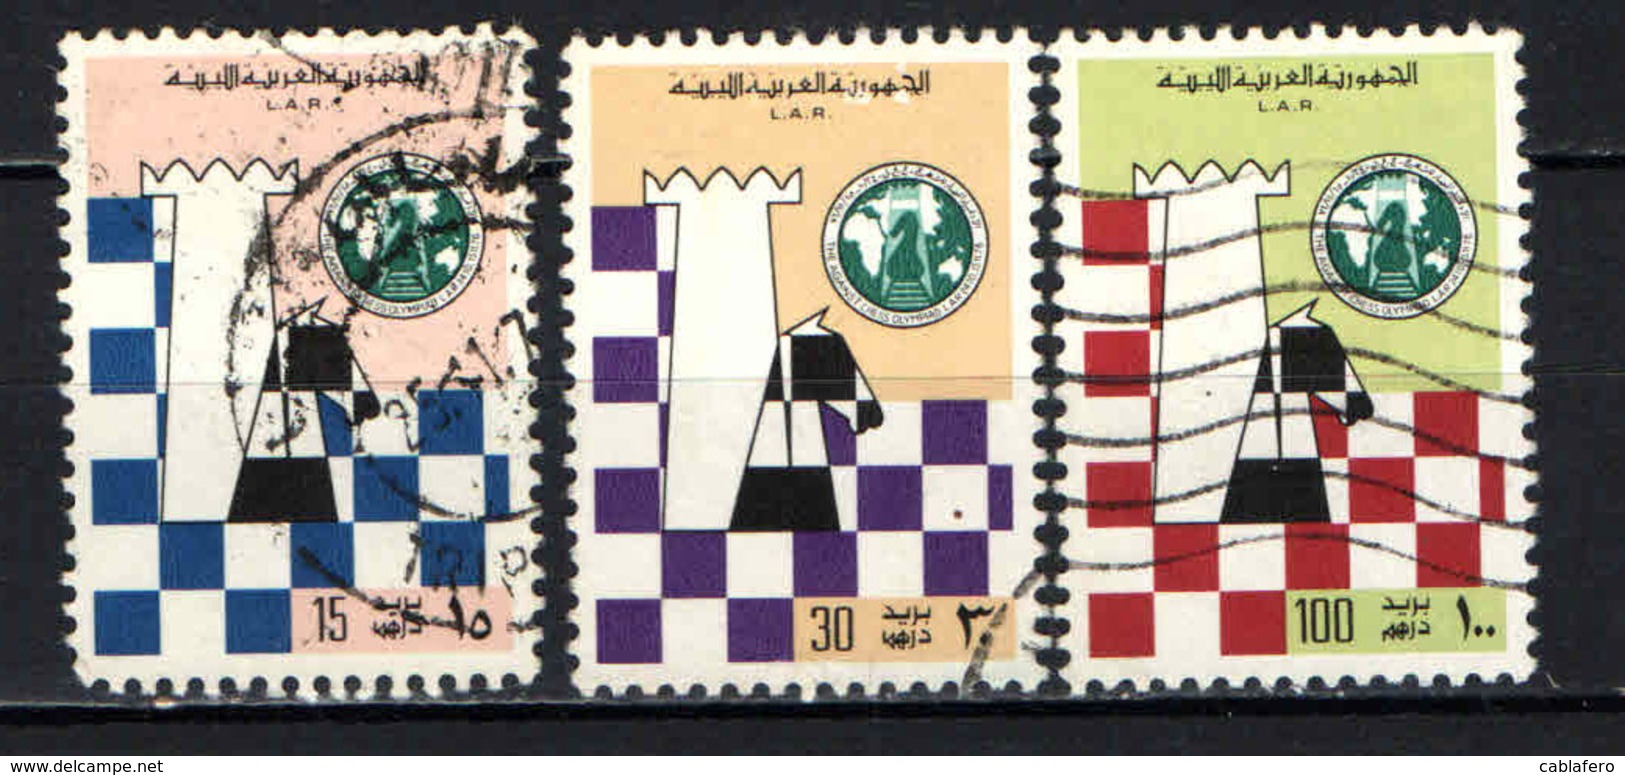 LIBIA - 1976 - The “Against” (protest) Chess Olympiad Tripoli, Oct. 24-Nov. 15 - USATI - Libia